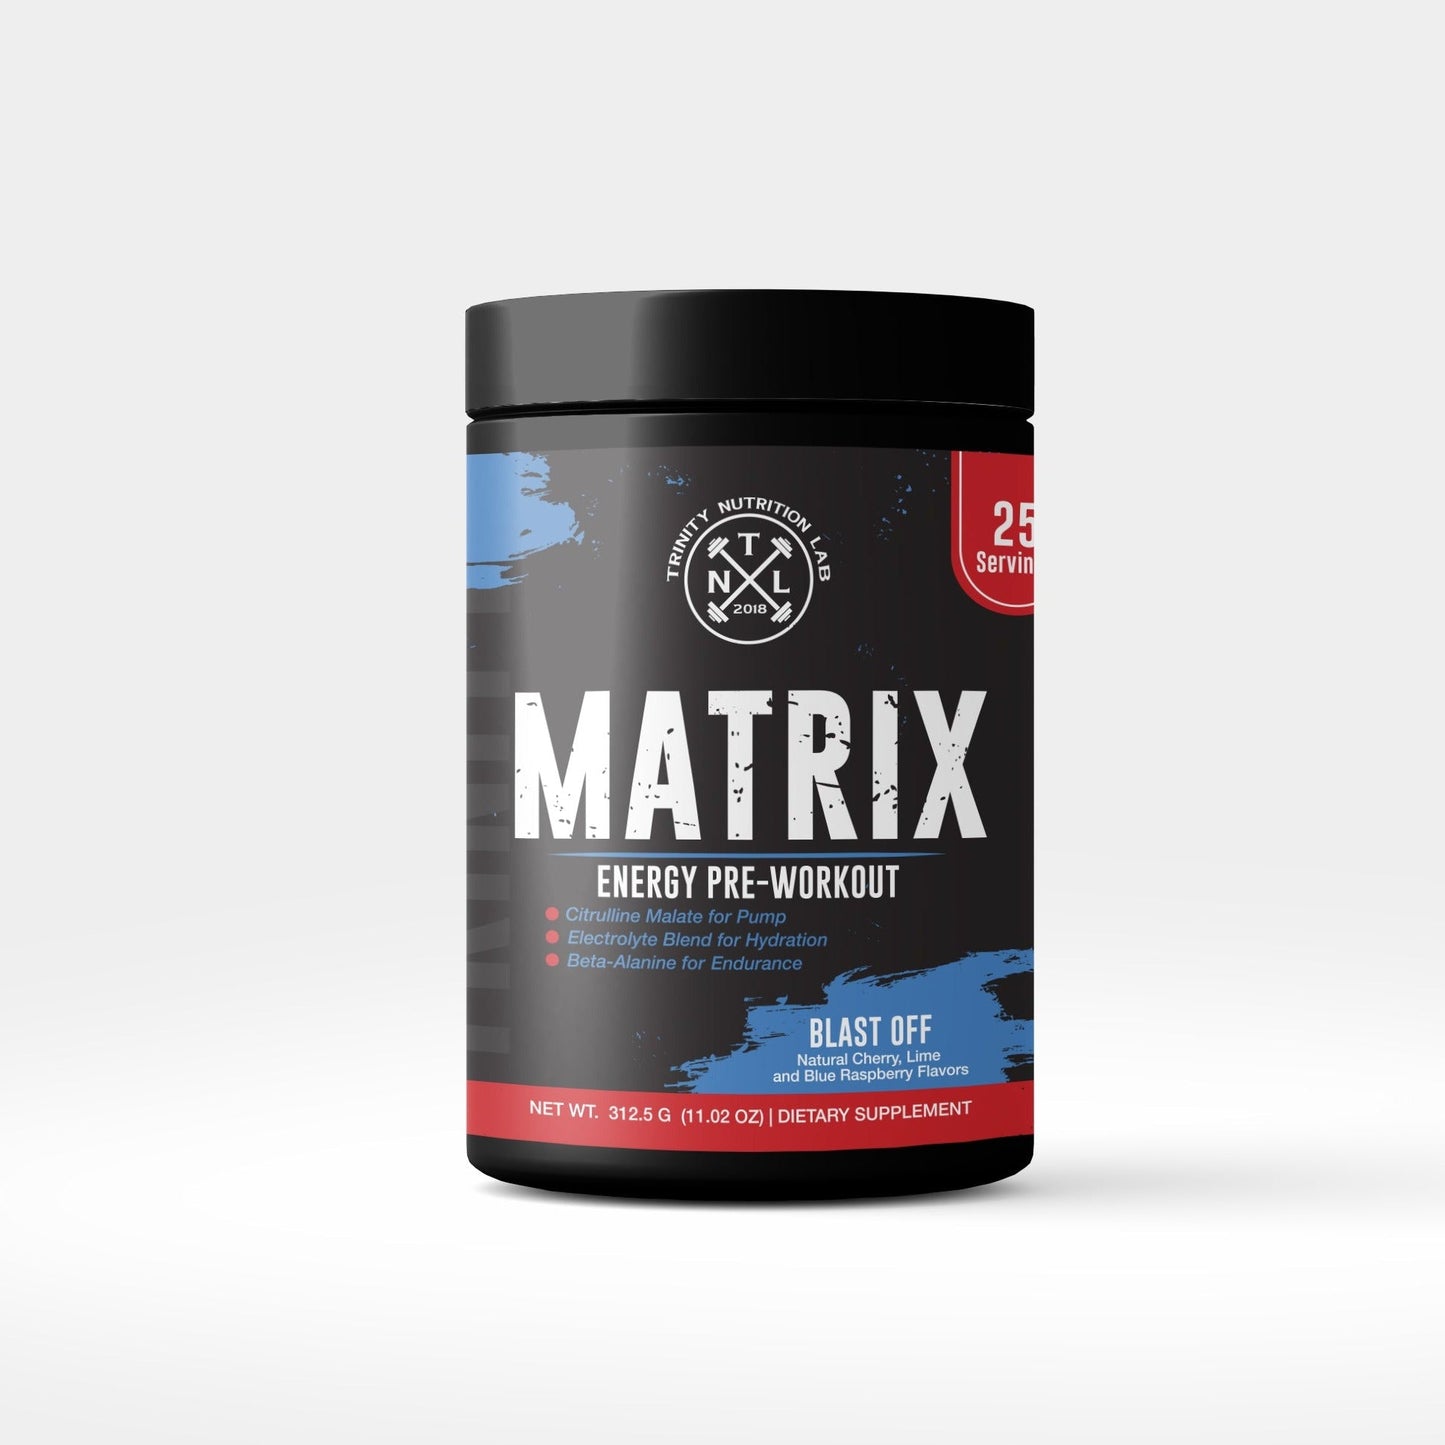 Best Tasting Pre-Workout On The Market